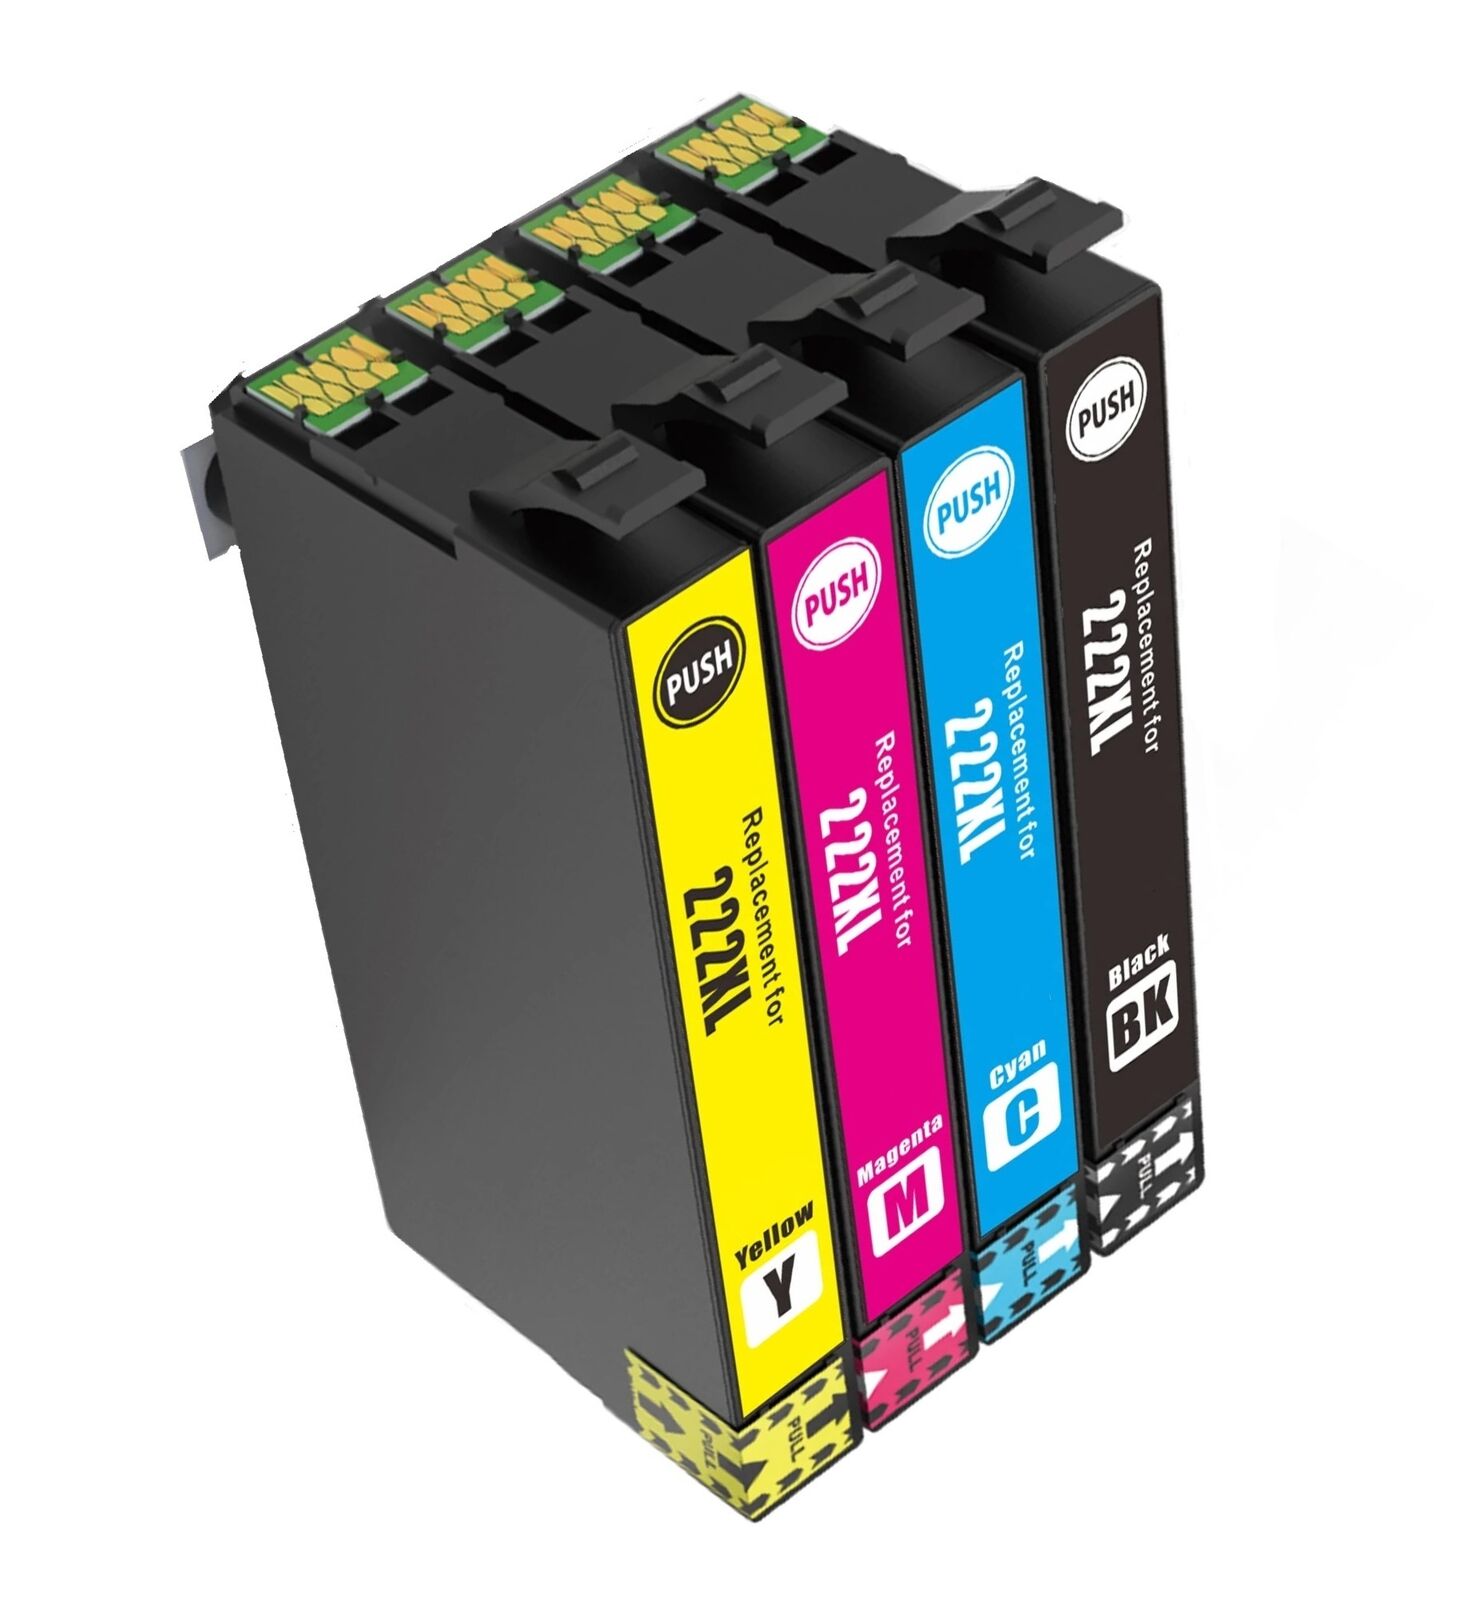 T222 XL 222XL Compatible Ink Cartridge Replacement for XP-5200 WF-2960 - 4 Pack